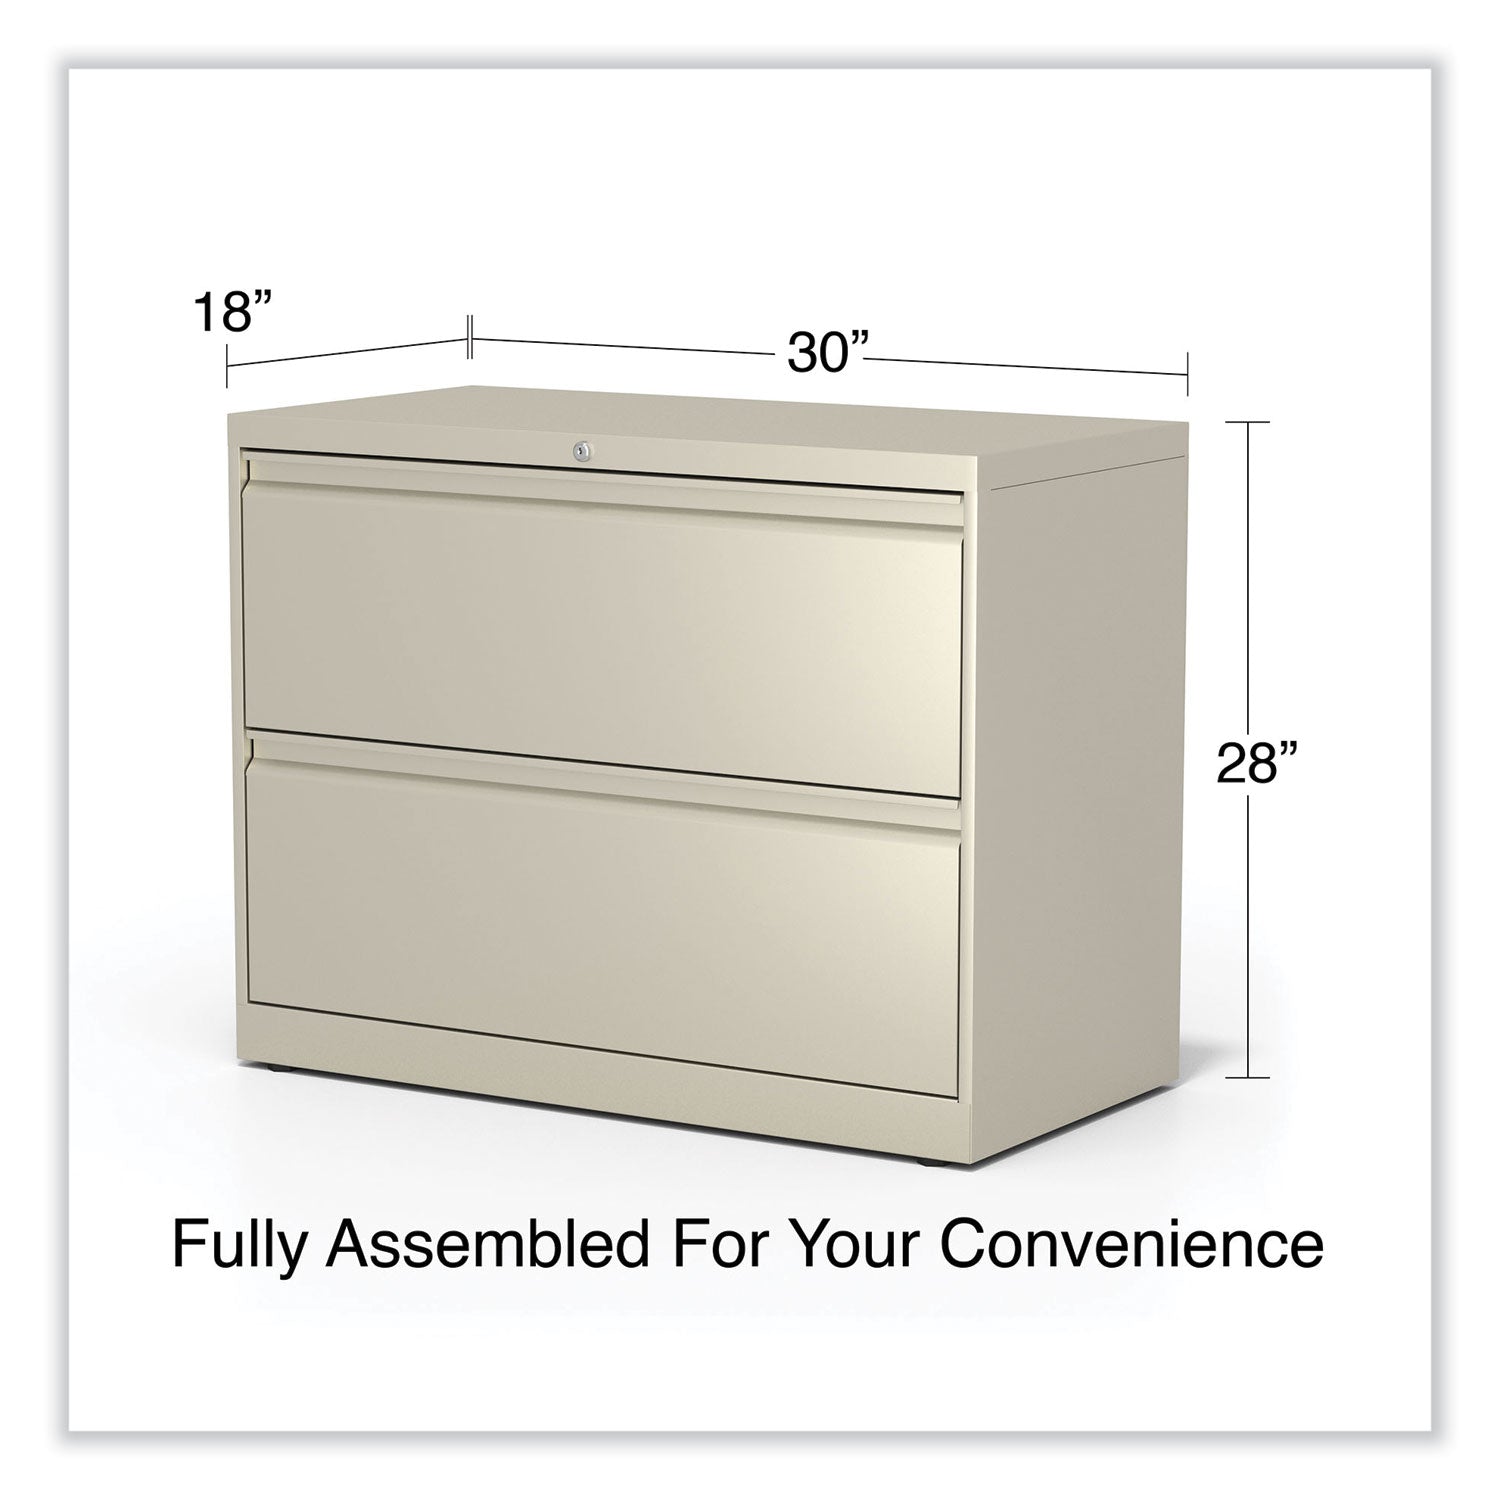 lateral-file-2-legal-letter-size-file-drawers-putty-36-x-1863-x-28_alehlf3629py - 6